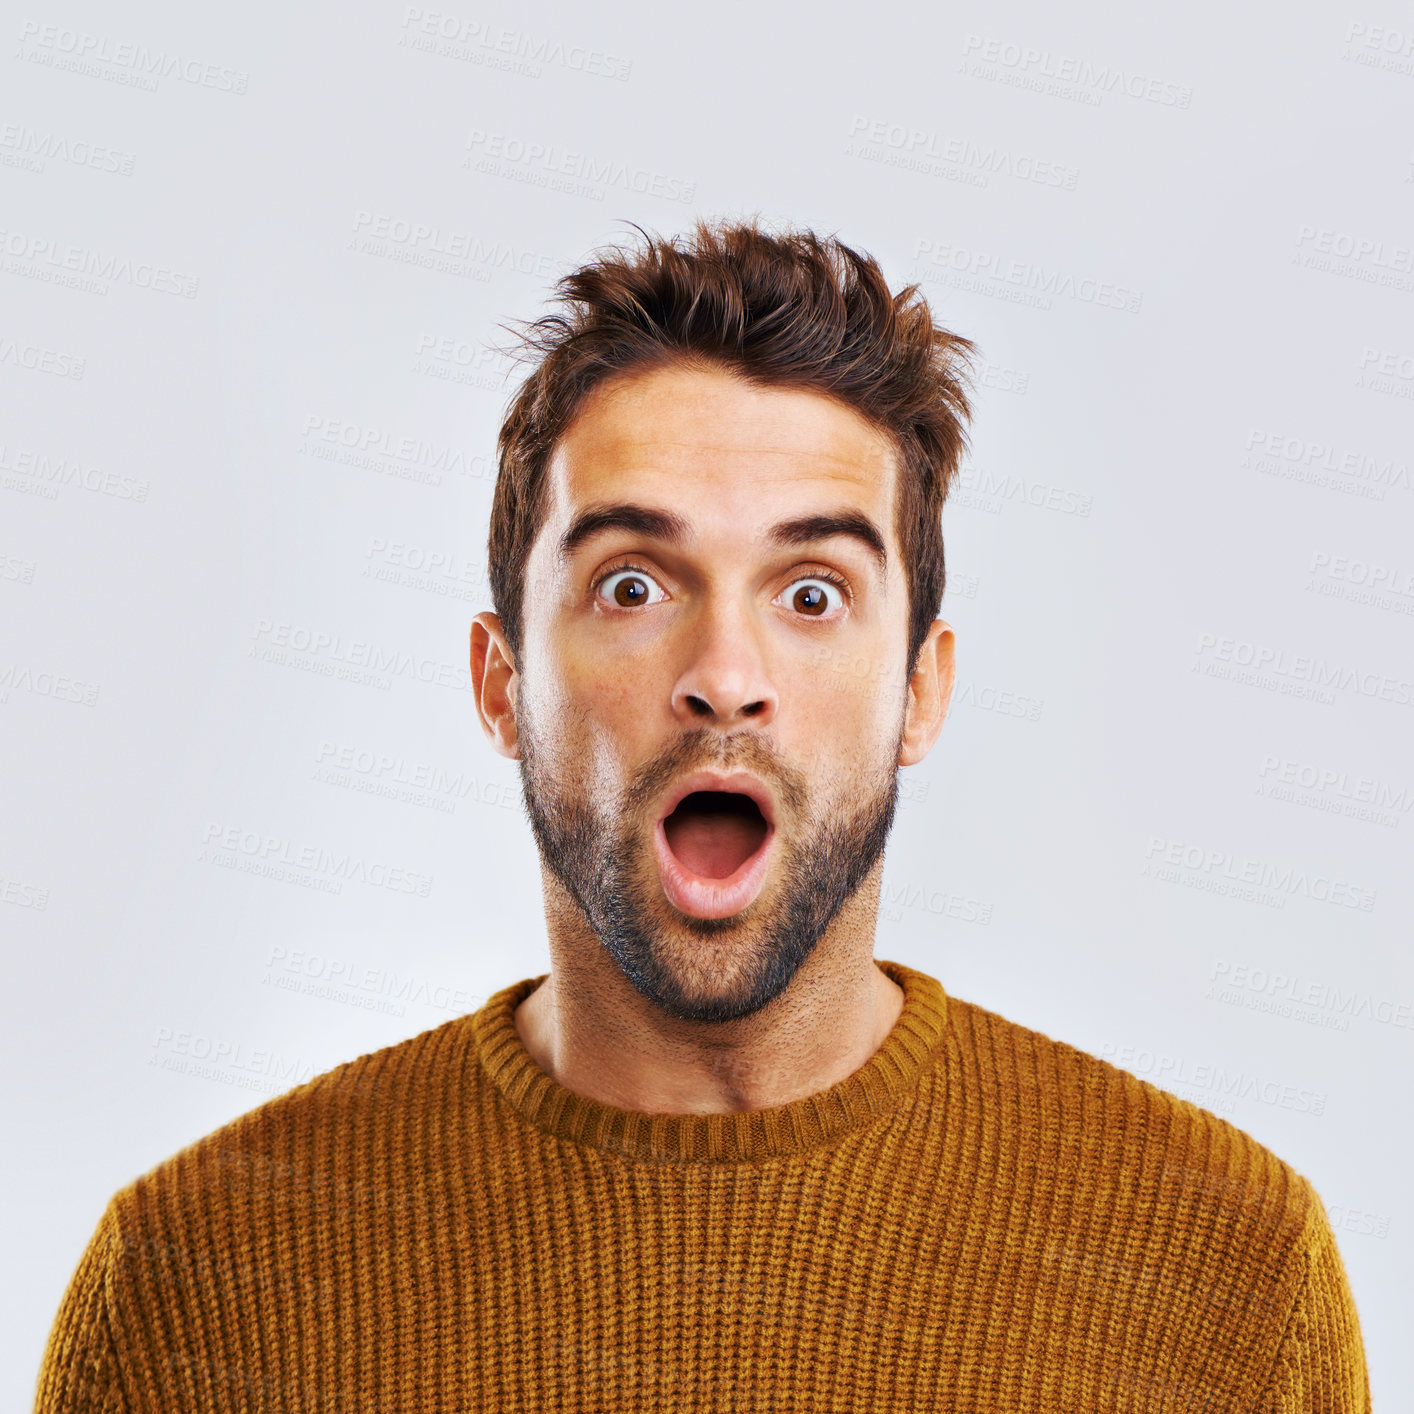 Buy stock photo Shock, surprise and portrait of a man in a studio with an amazed facial expression or attitude. Shocked, amazing news and male model with a wtf, omg or wow face gesture isolated. by white background.